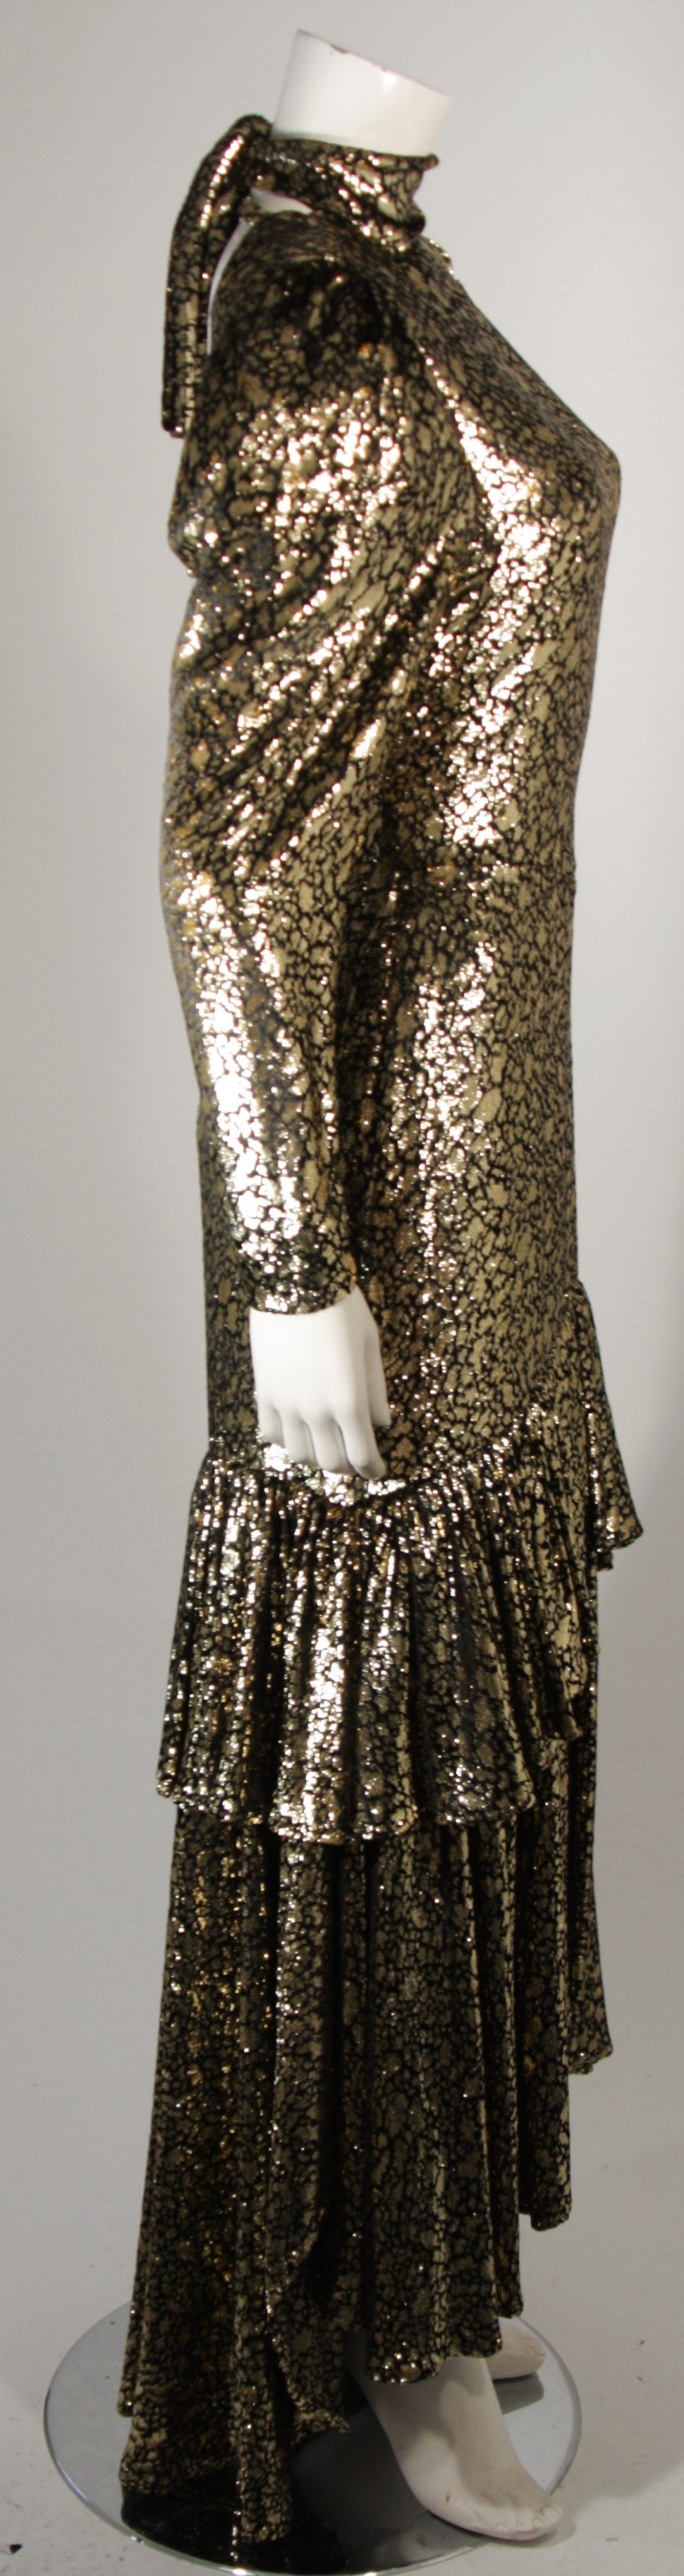 Sonia Rykiel Black and Gold Metallic Accented Tiered Gown Size Small In Excellent Condition For Sale In Los Angeles, CA